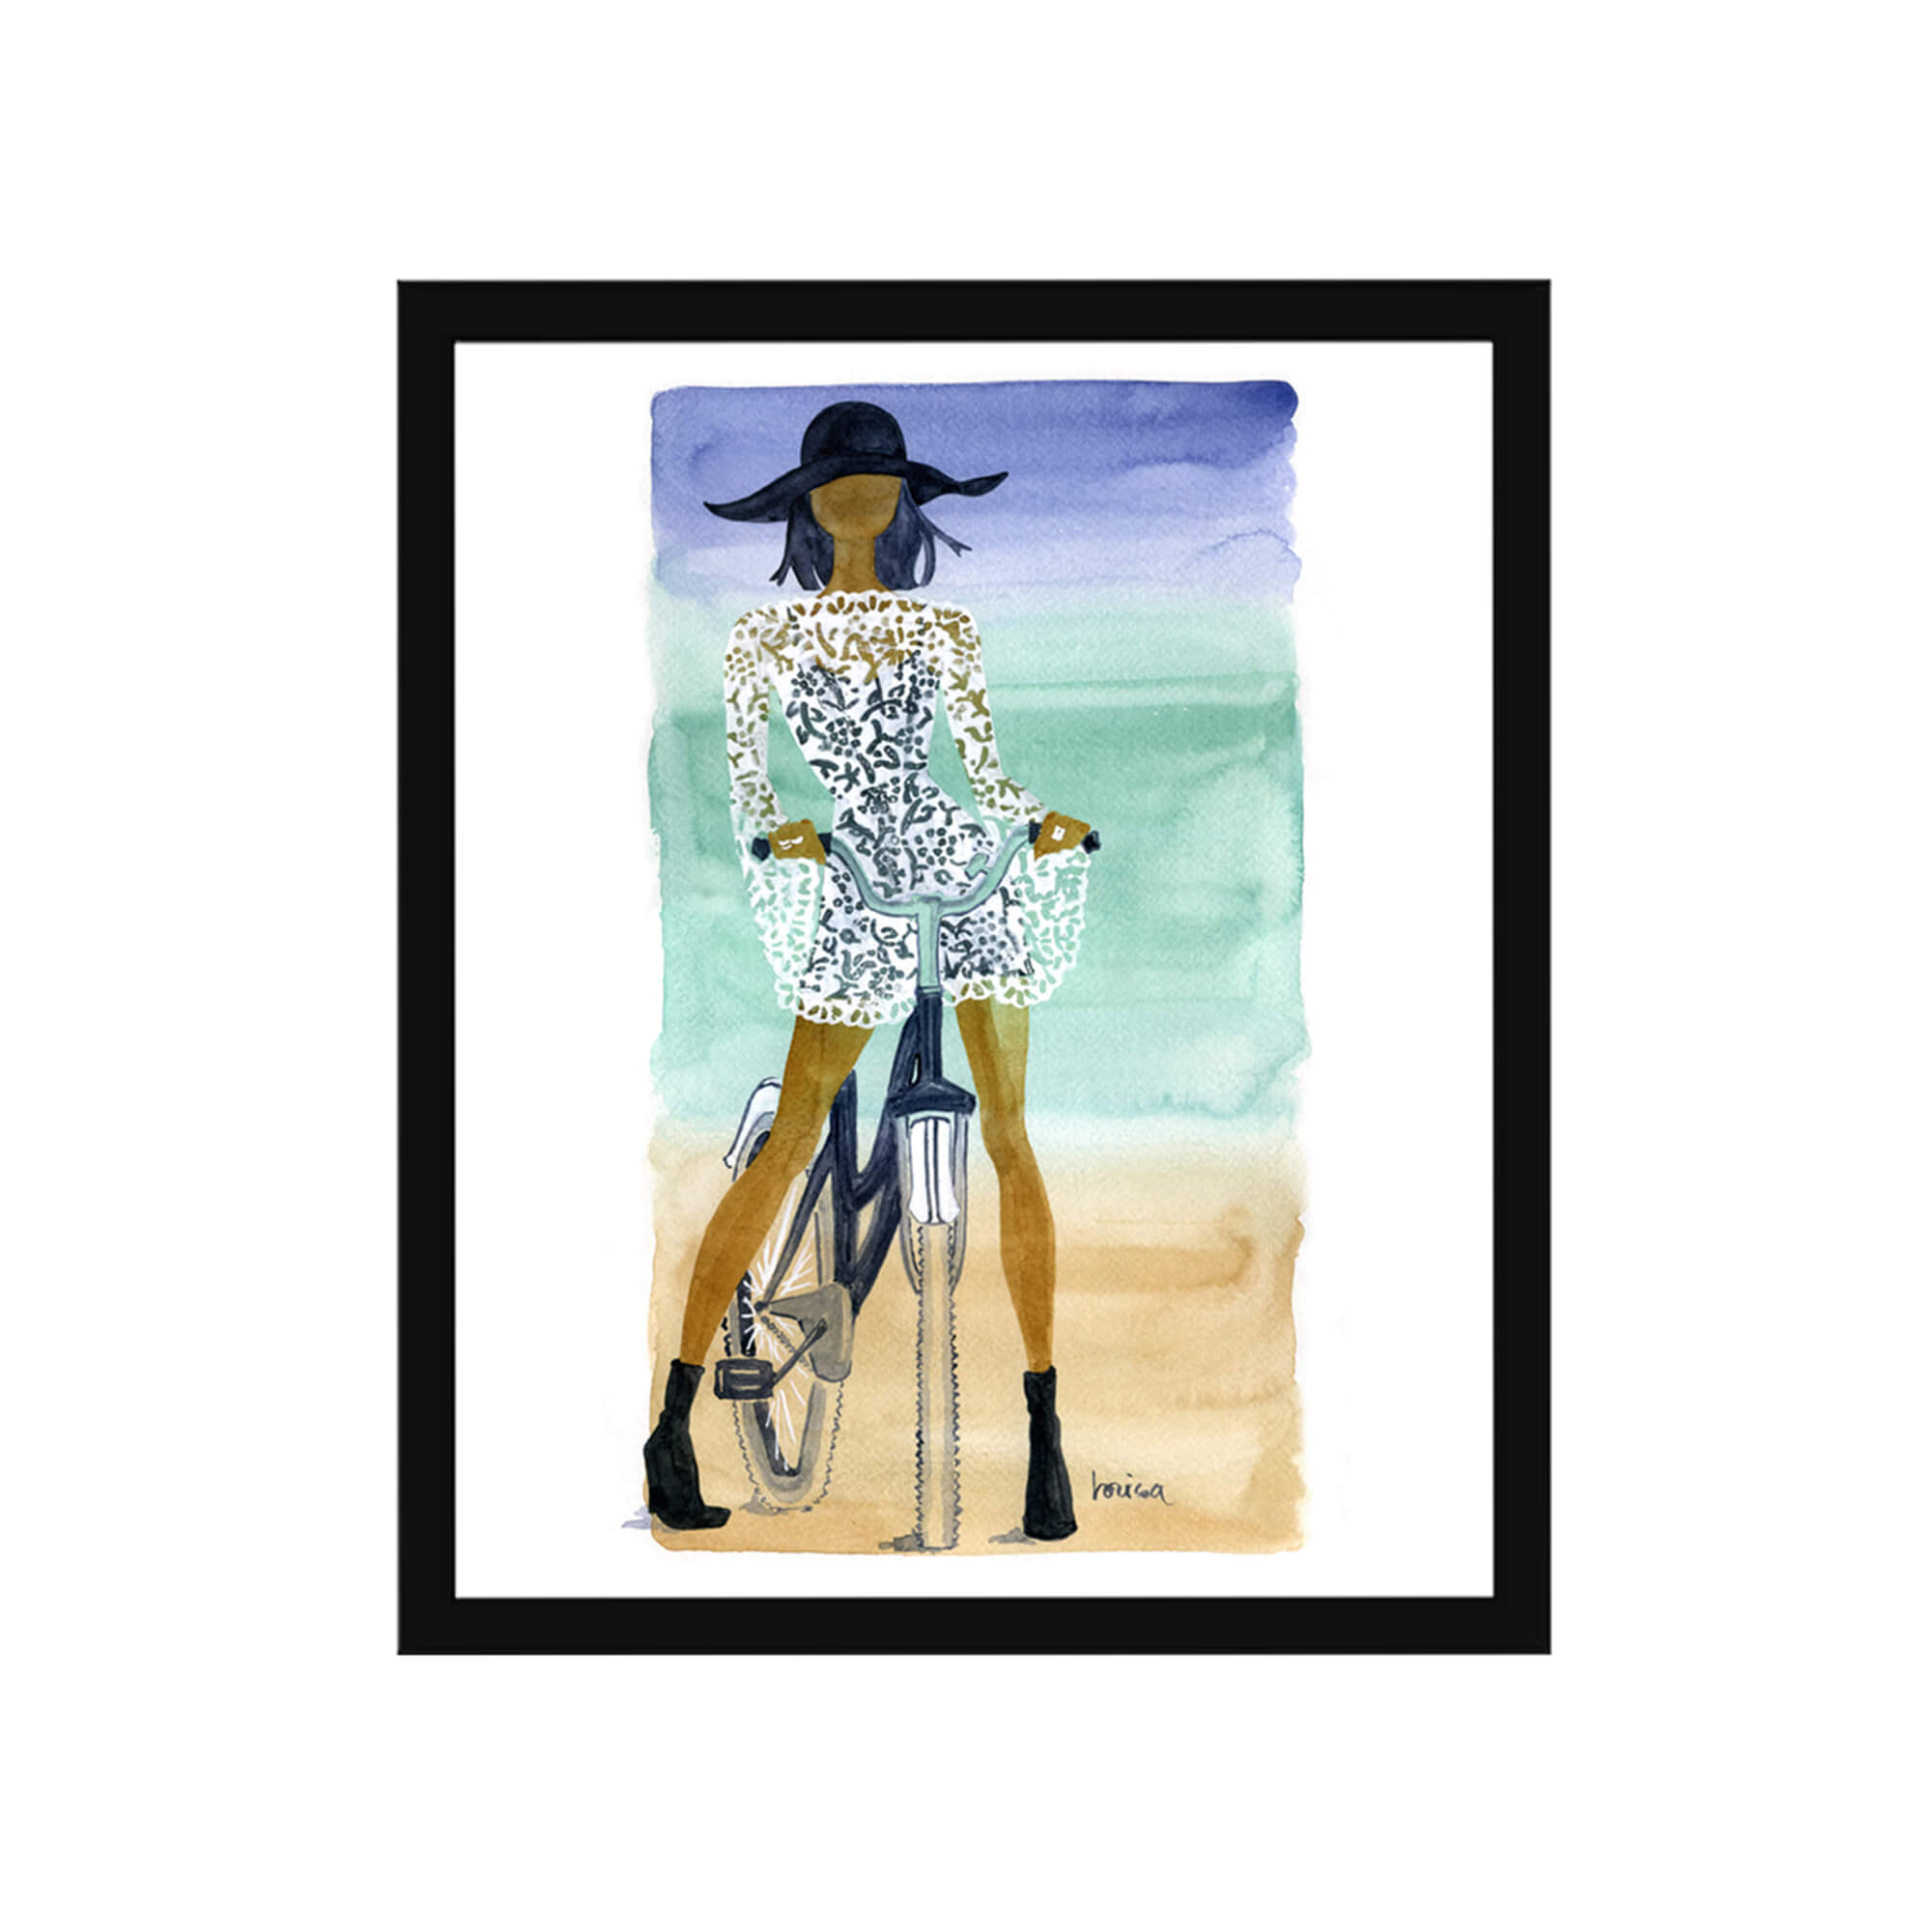 Framed paper giclée print of a watercolor artwork featuring a fashionable woman on a bike by Hawaii artist Lovisa Oliv